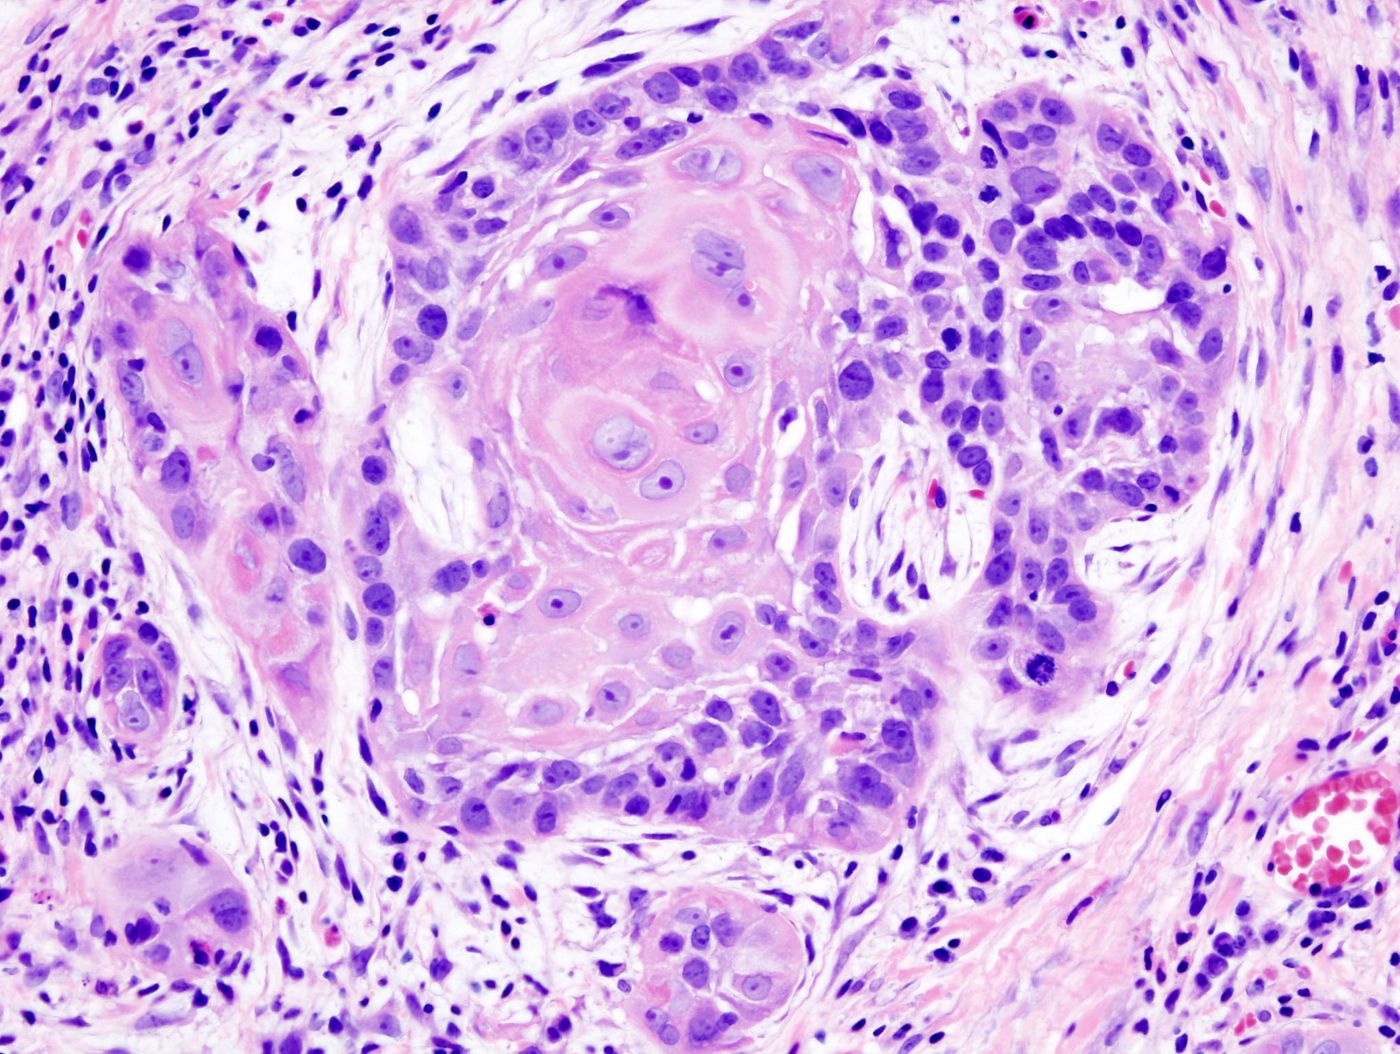 Biopsy of a highly differentiated squamous cell carcinoma of the mouth.